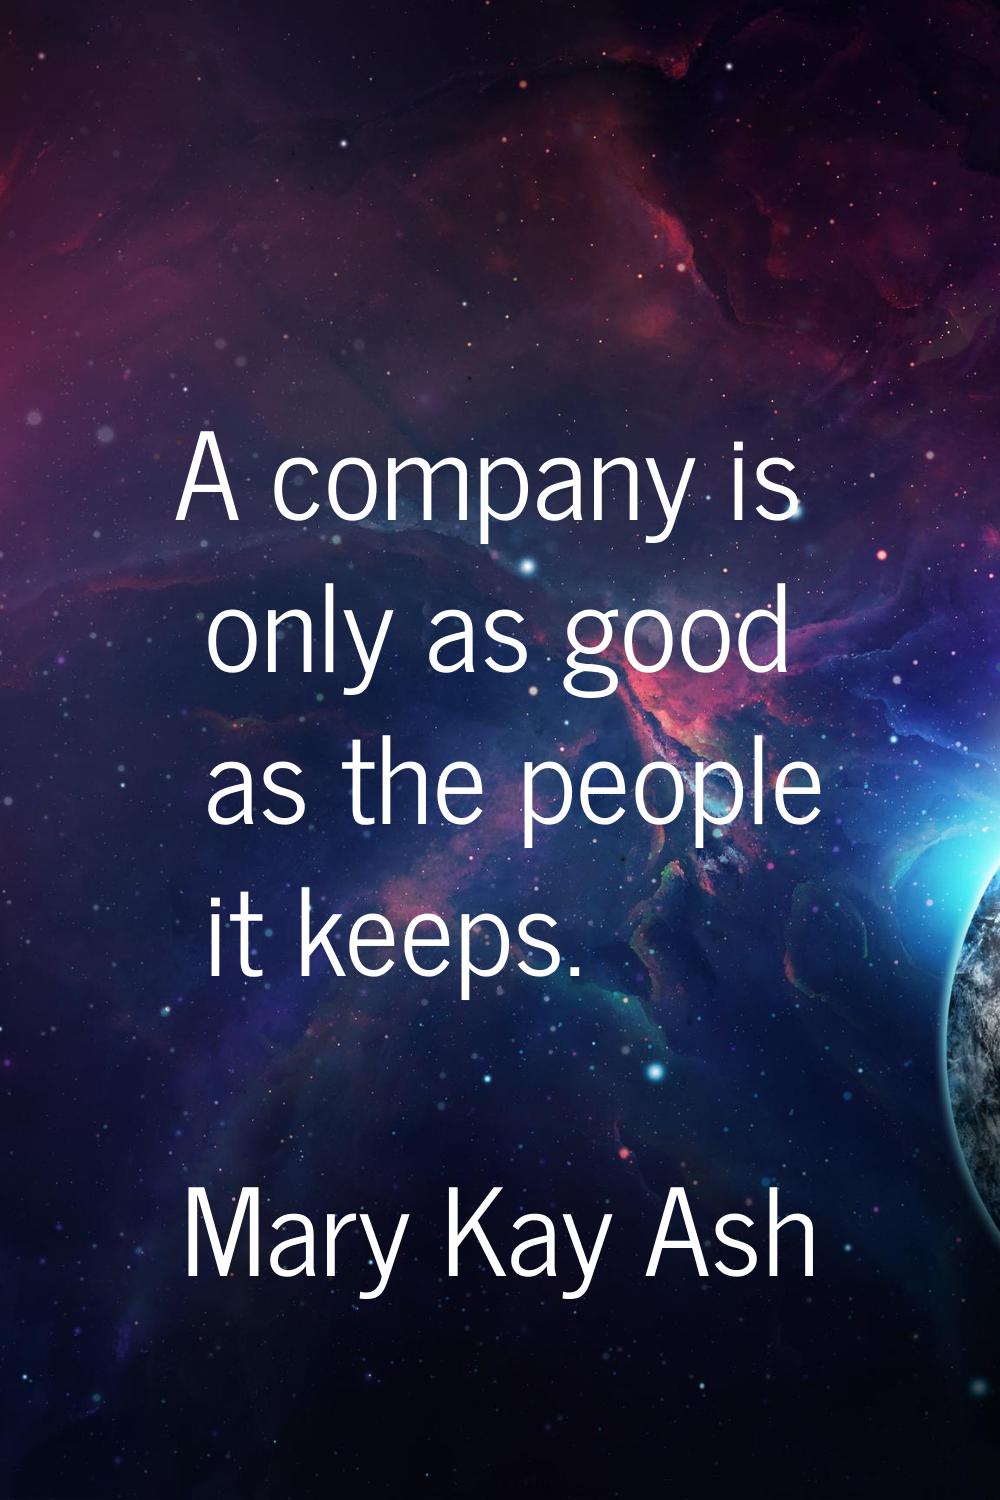 A company is only as good as the people it keeps.